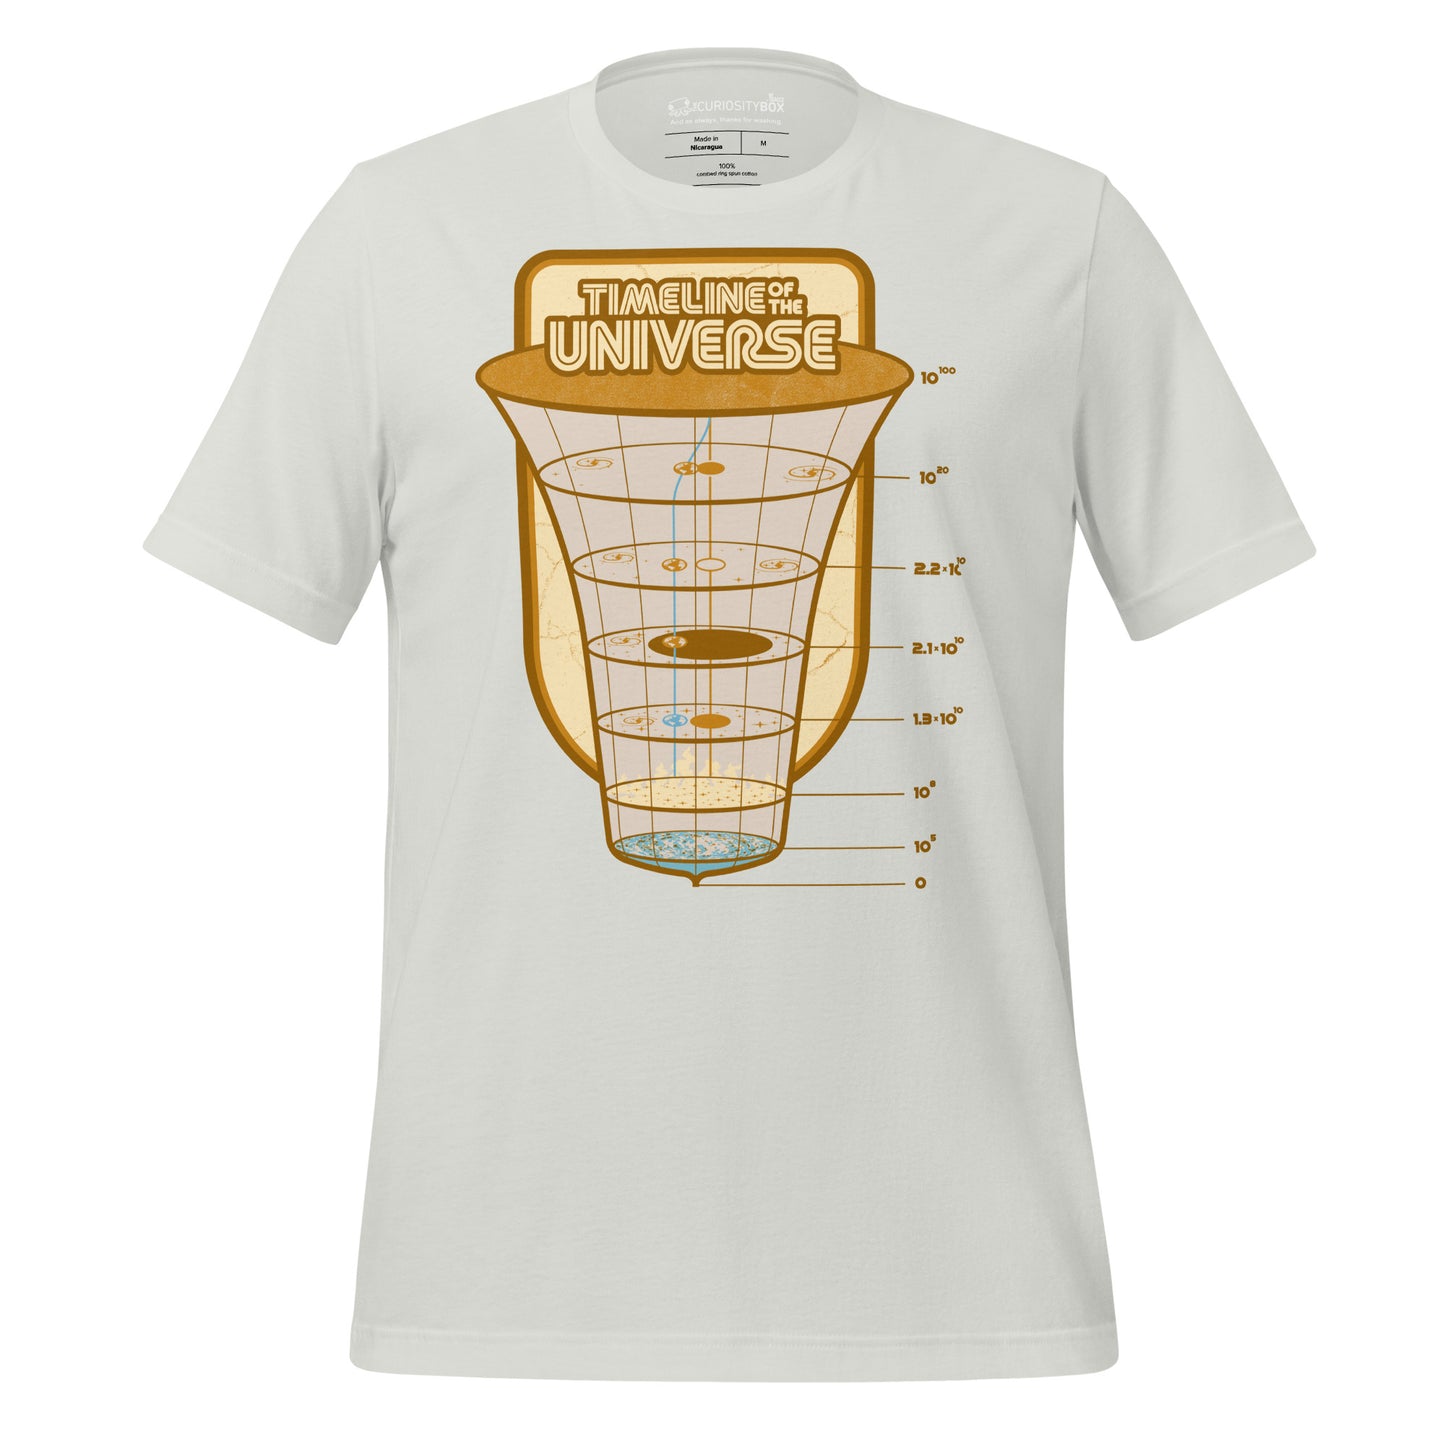 Timeline of the Universe Shirt